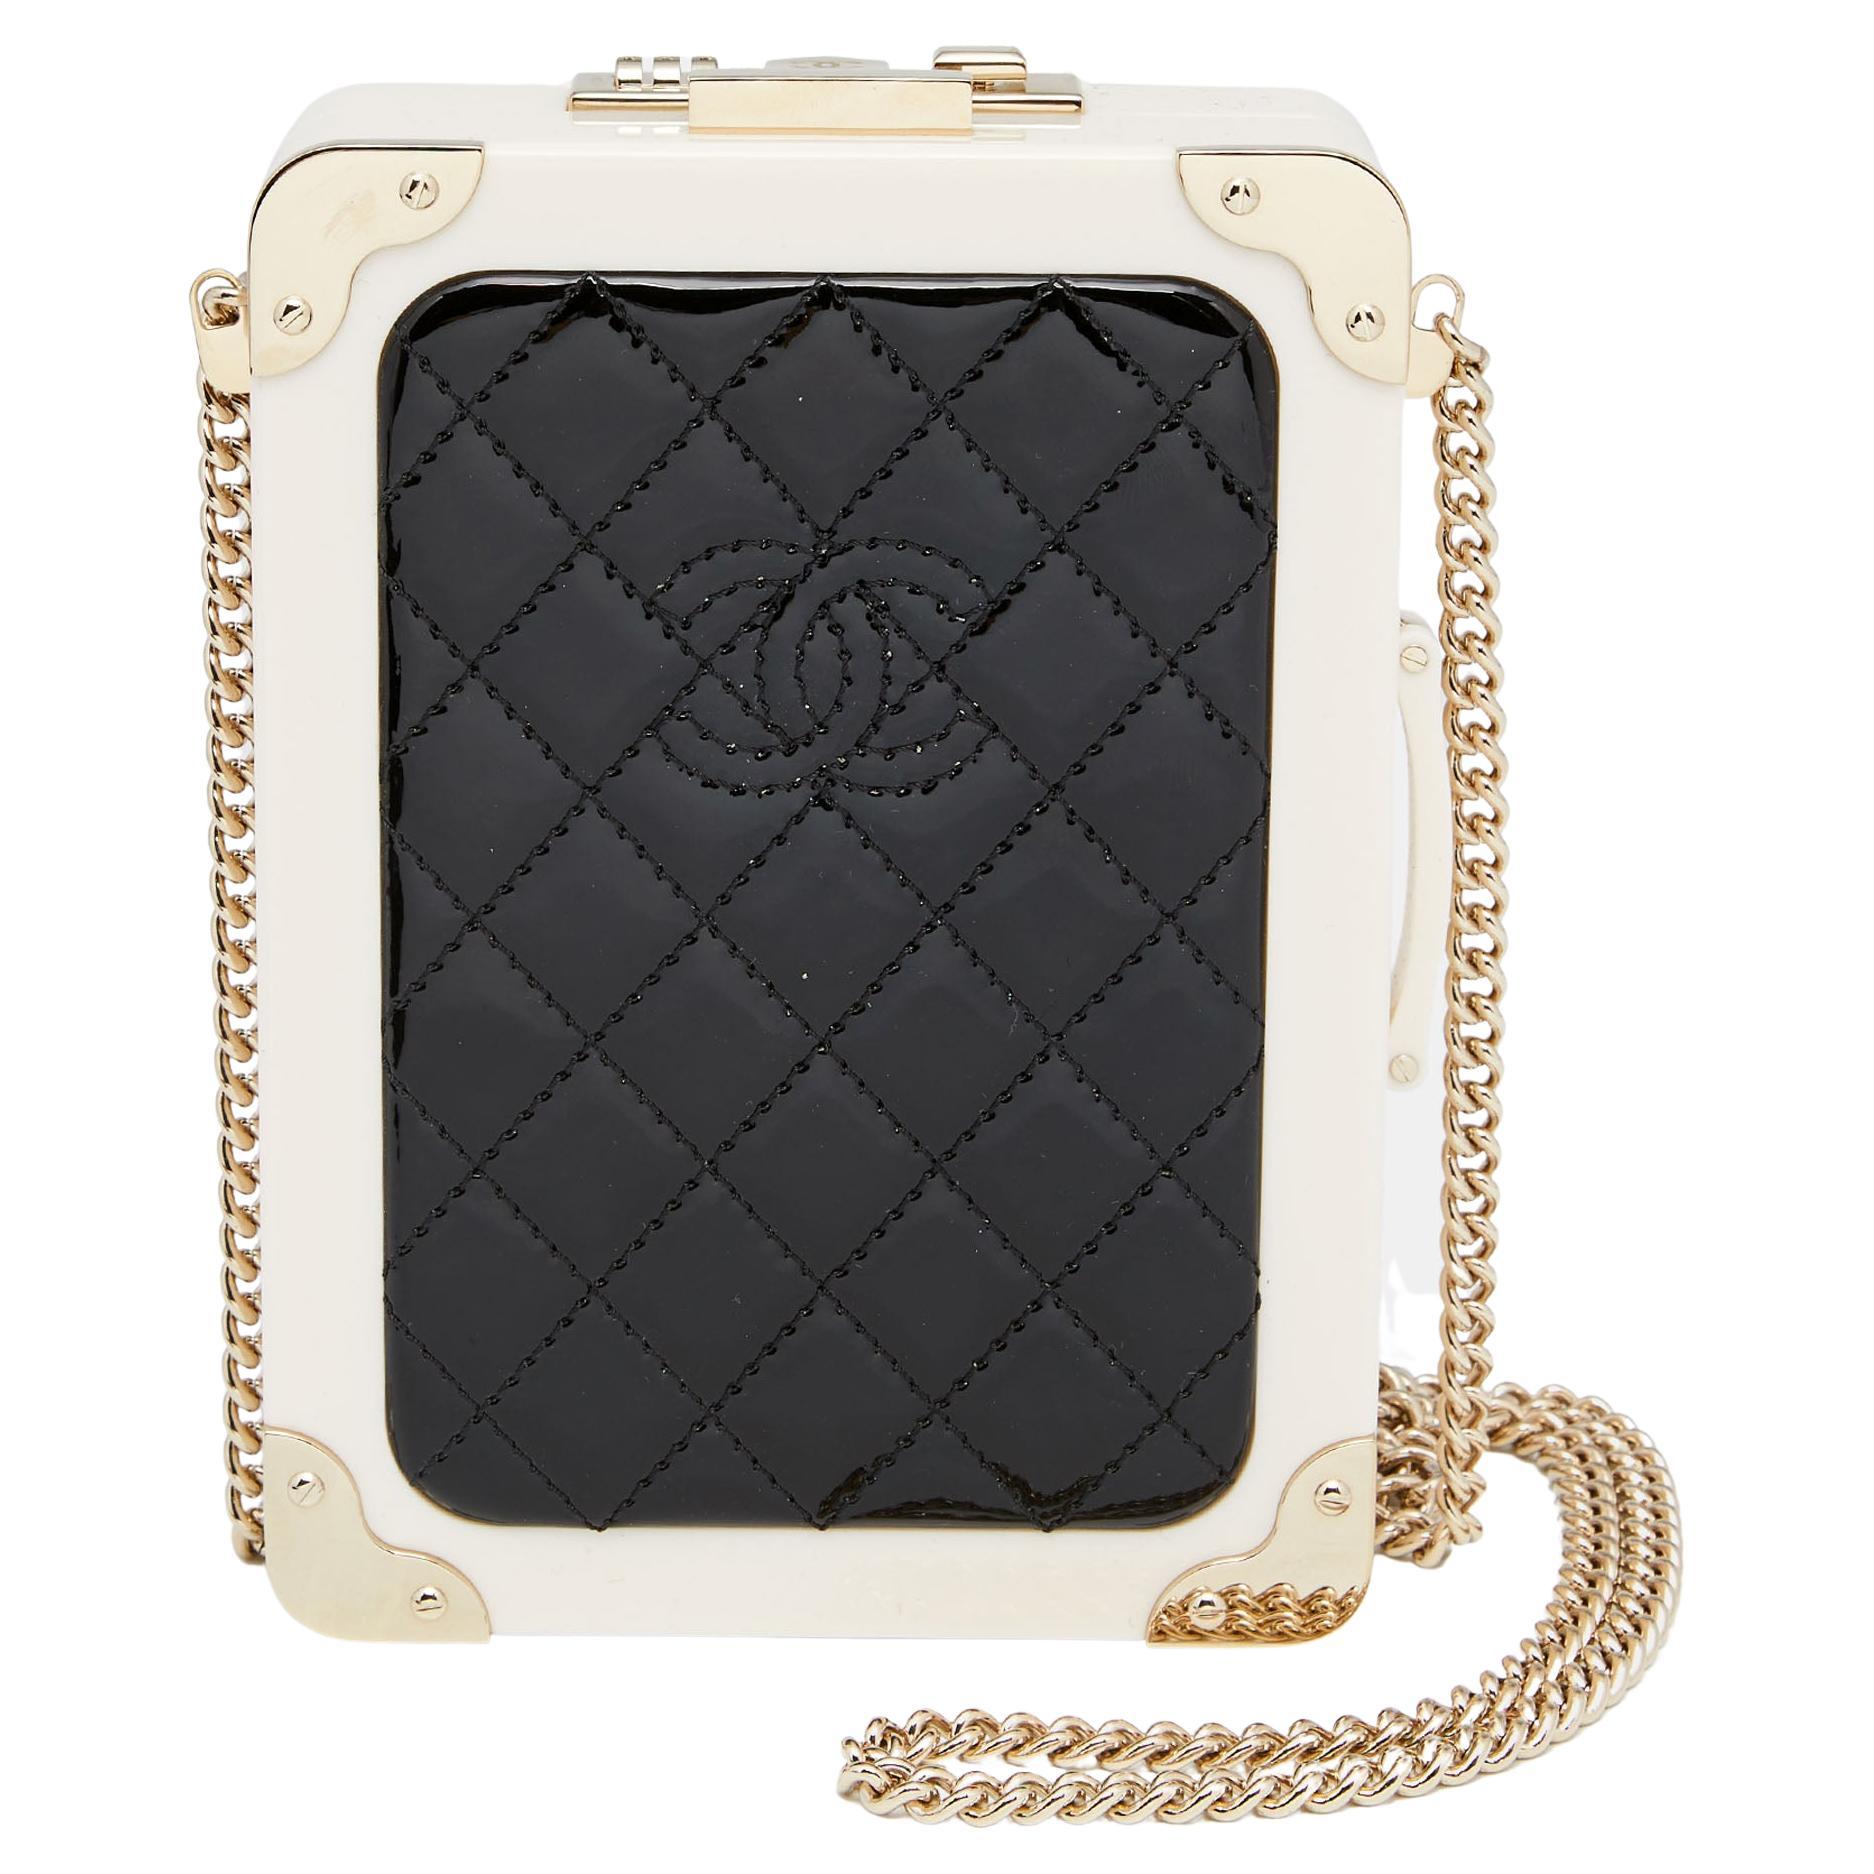 Chanel White/Black Quilted Patent Leather and Perspex Evening Trolley Minaudière